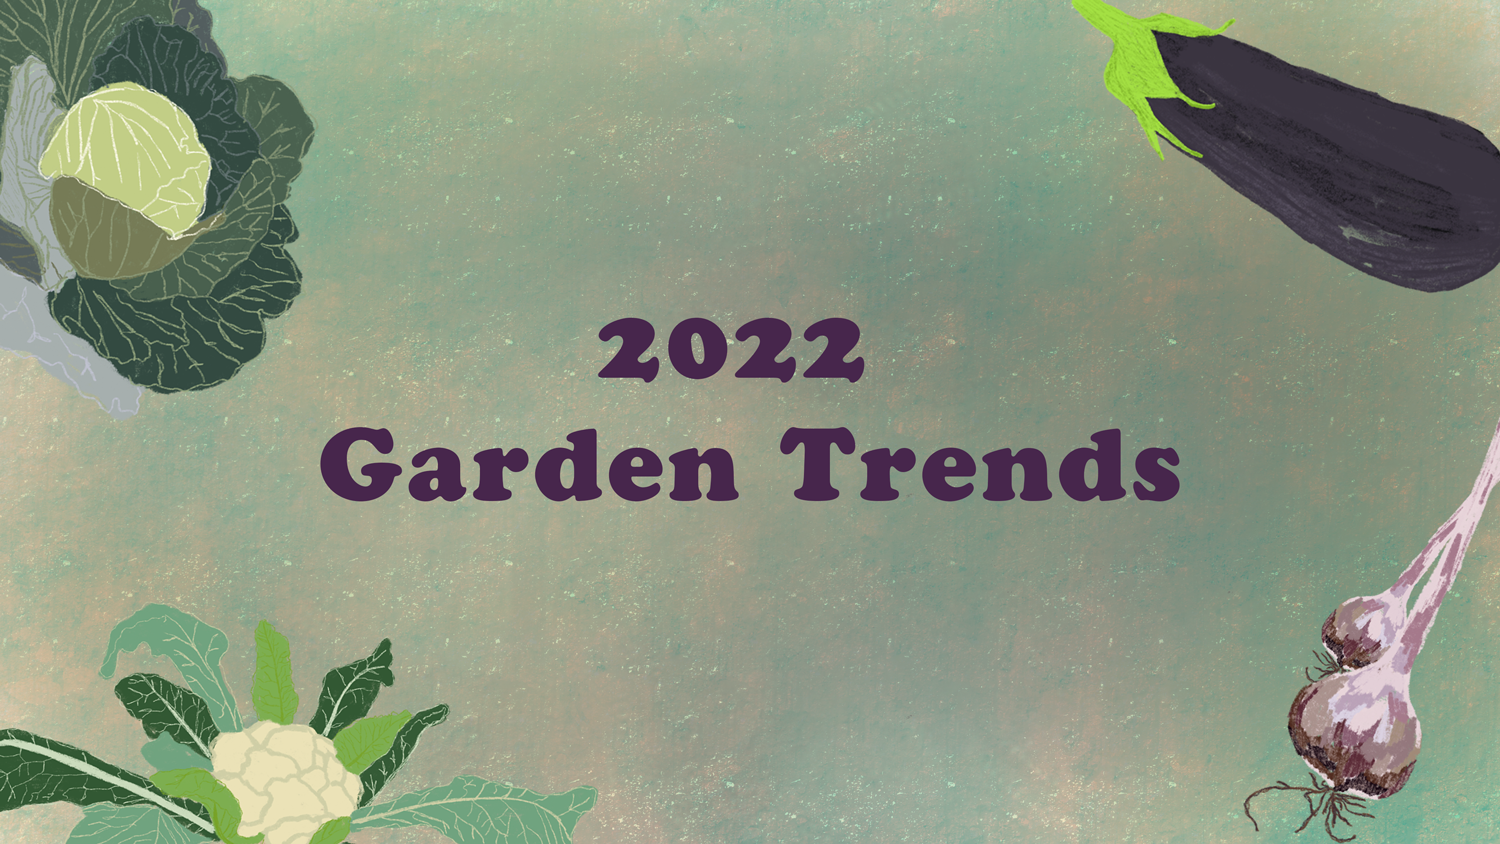 words 2022 Garden Trends and colored pencil graphics of eggplant, cabbage, cauliflower and garlic